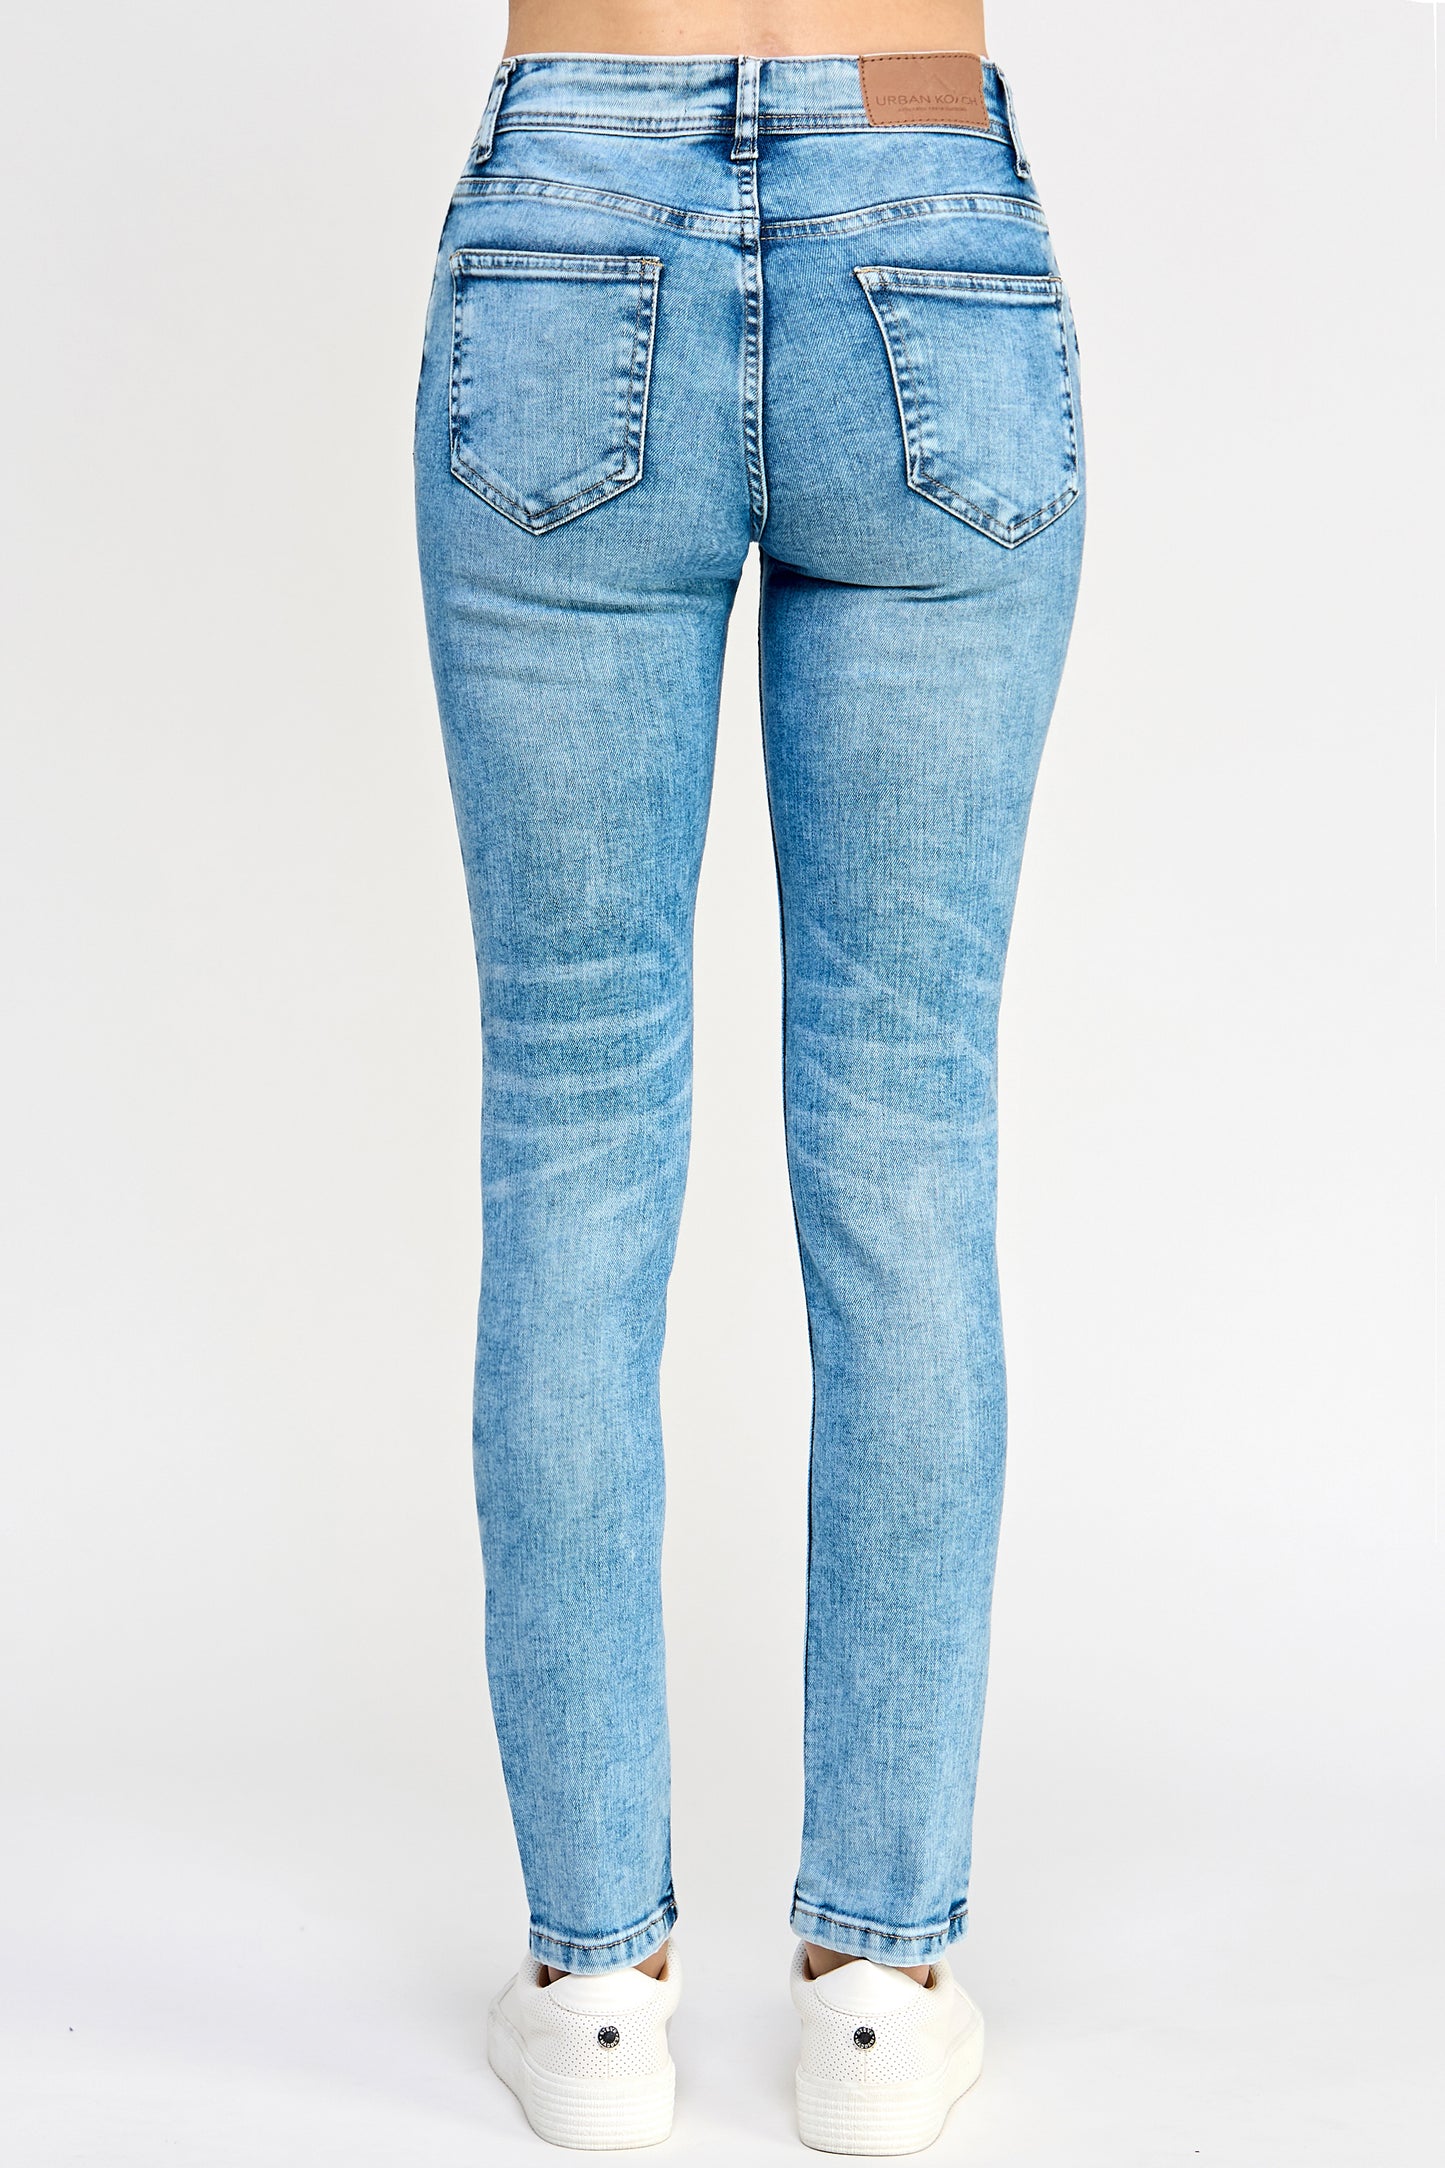 Erica Basic Fit Jeans